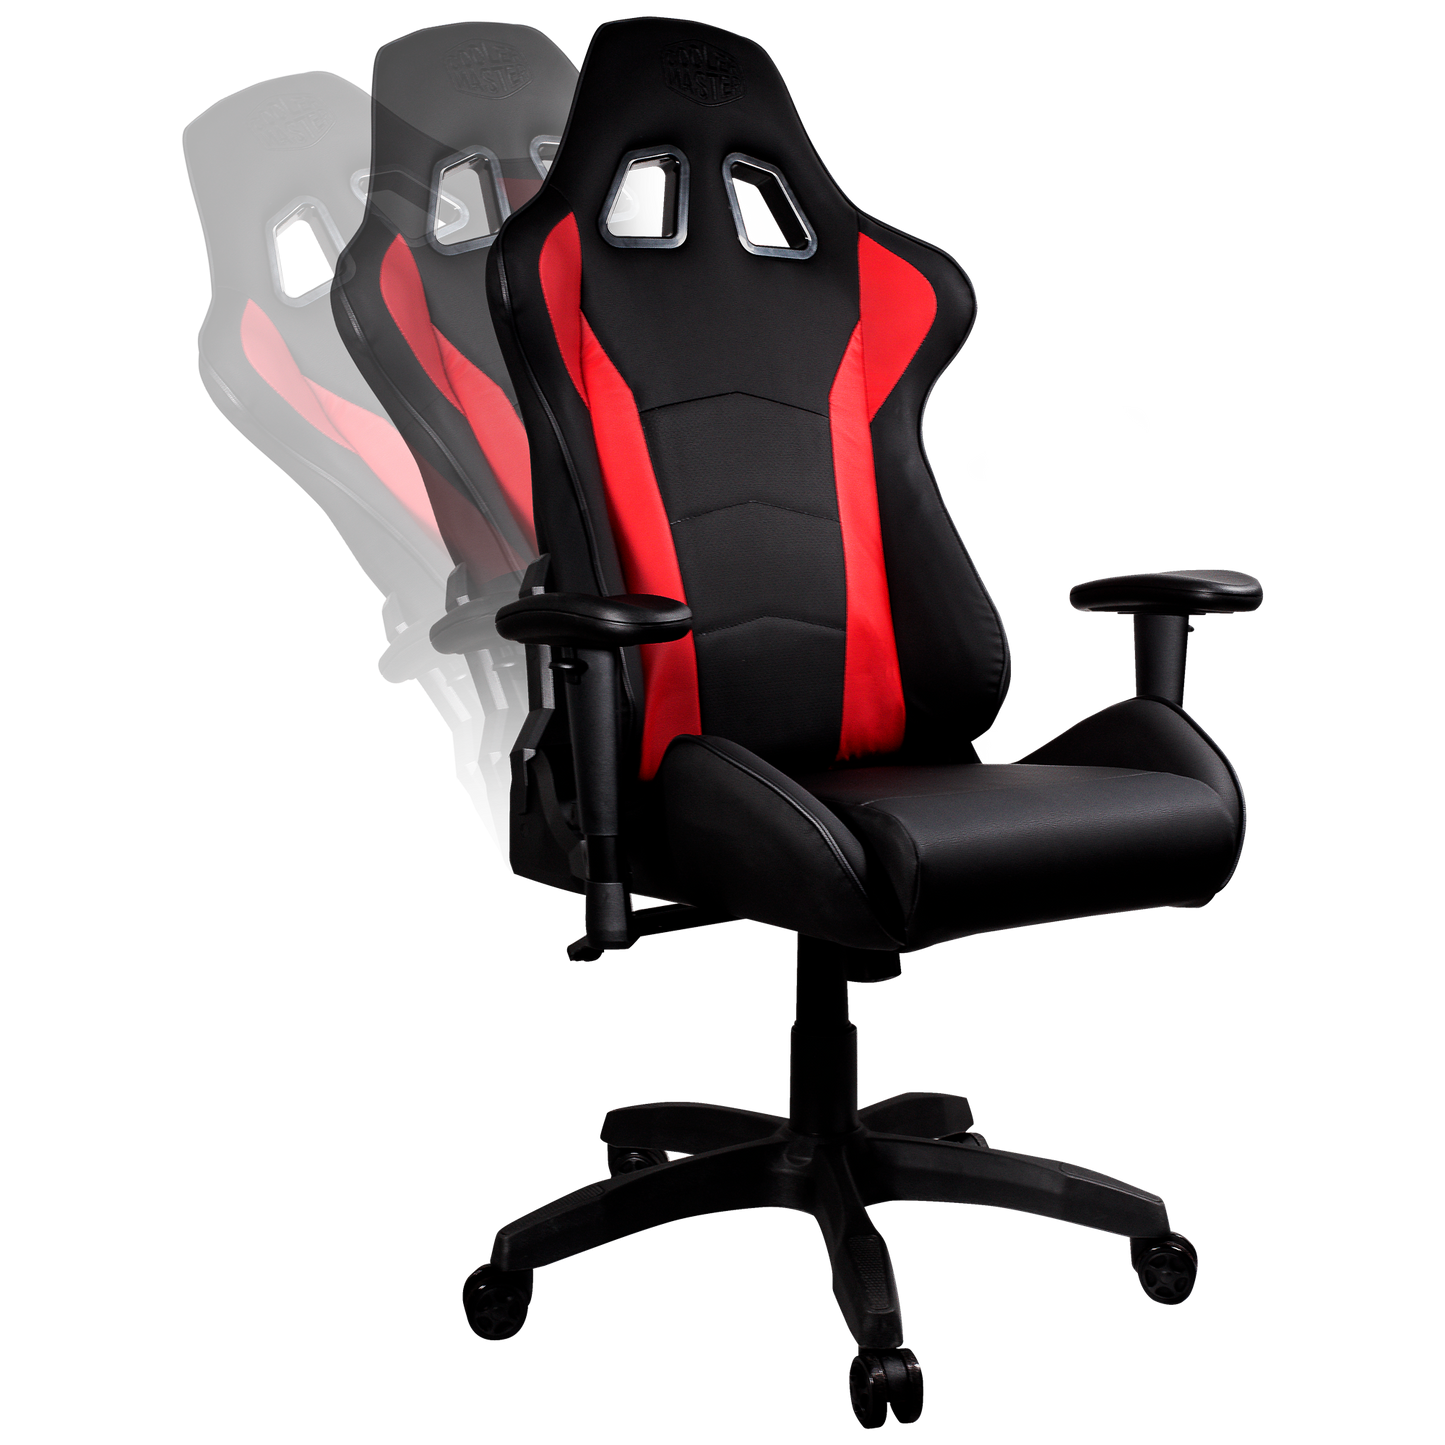 Cooler Master Caliber R1 Gaming Chair - Black/Red